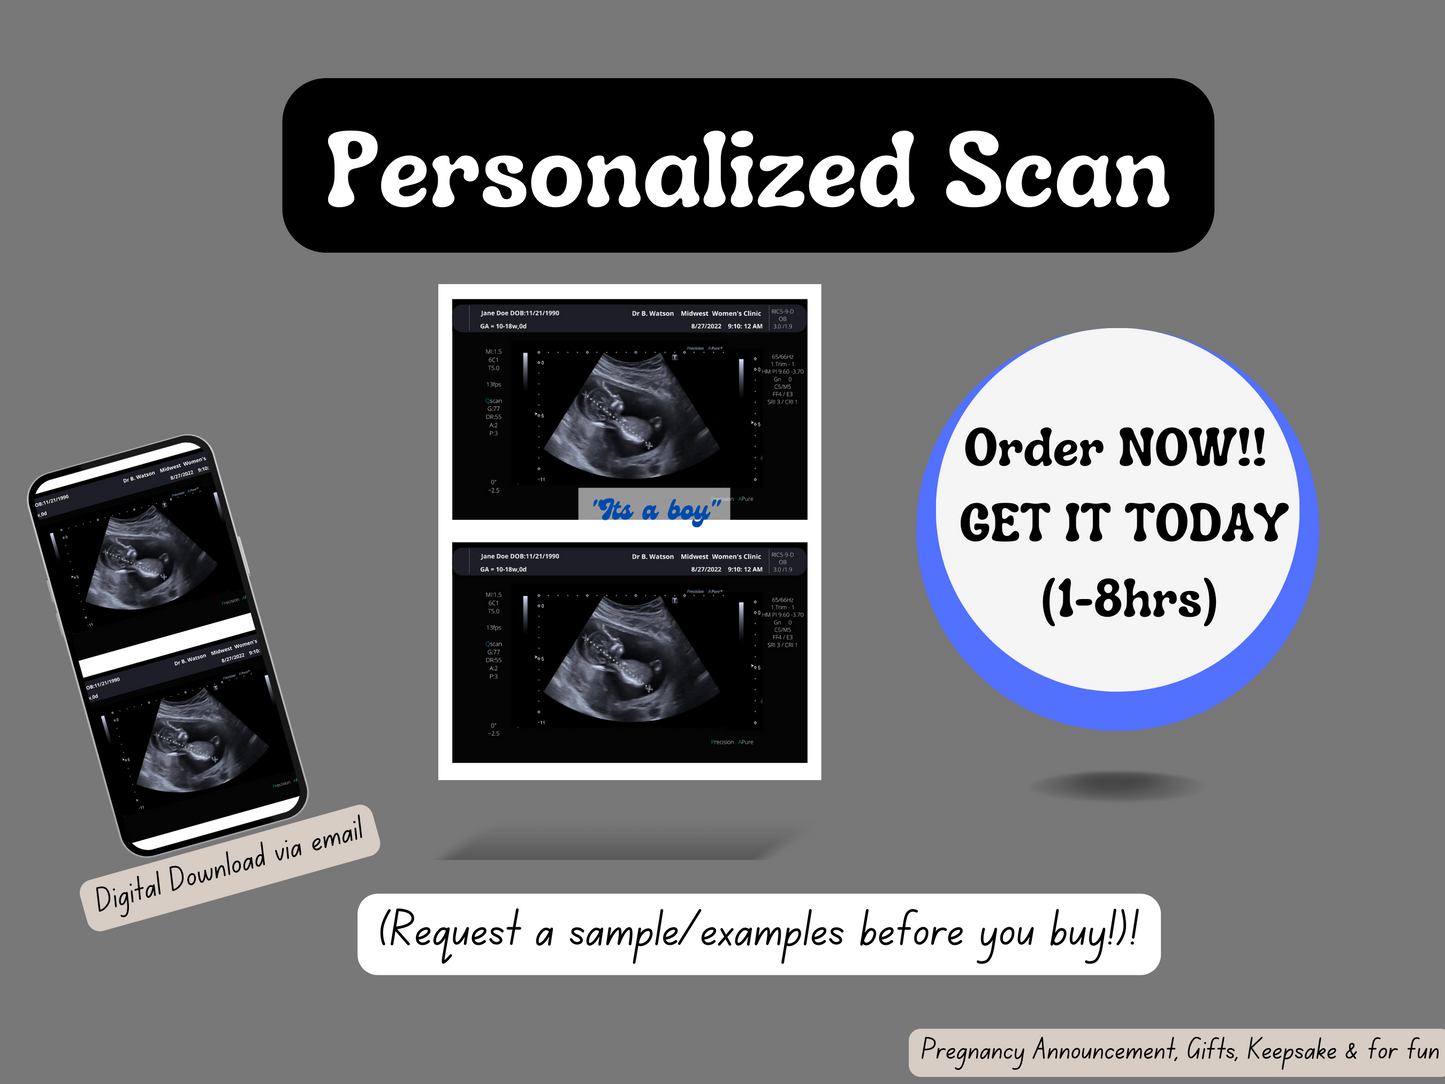 Personalized Fake Ultrasound Sonogram Picture!! From 3-40 weeks!